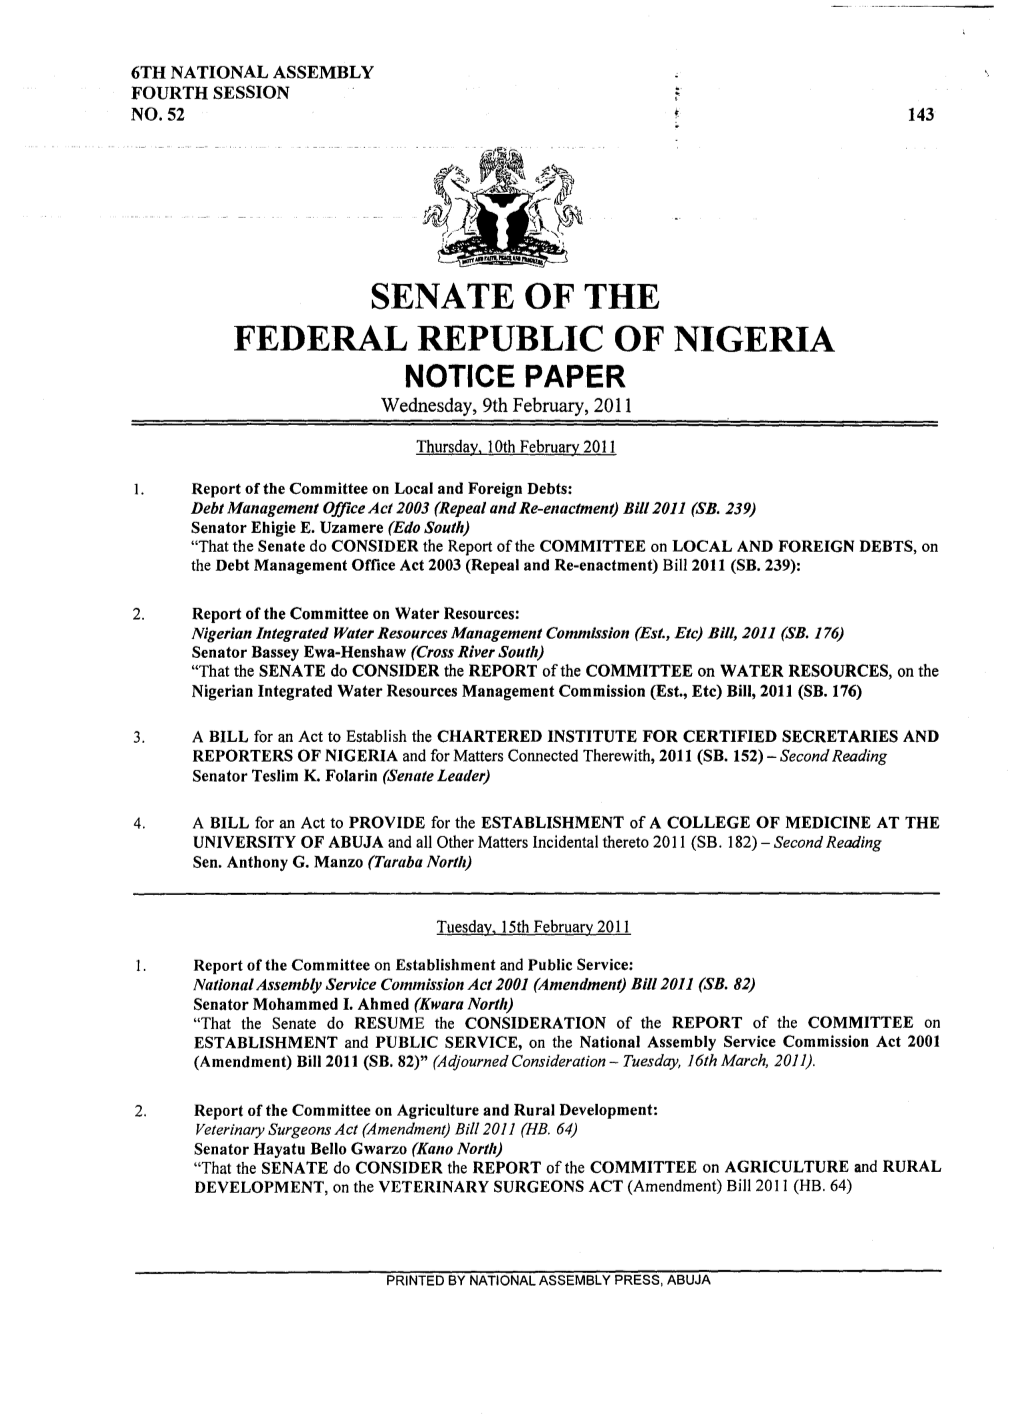 SENATE of the FEDERAL REPUBLIC of NIGERIA NOTICE PAPER Wednesday, 9Th February, 2011